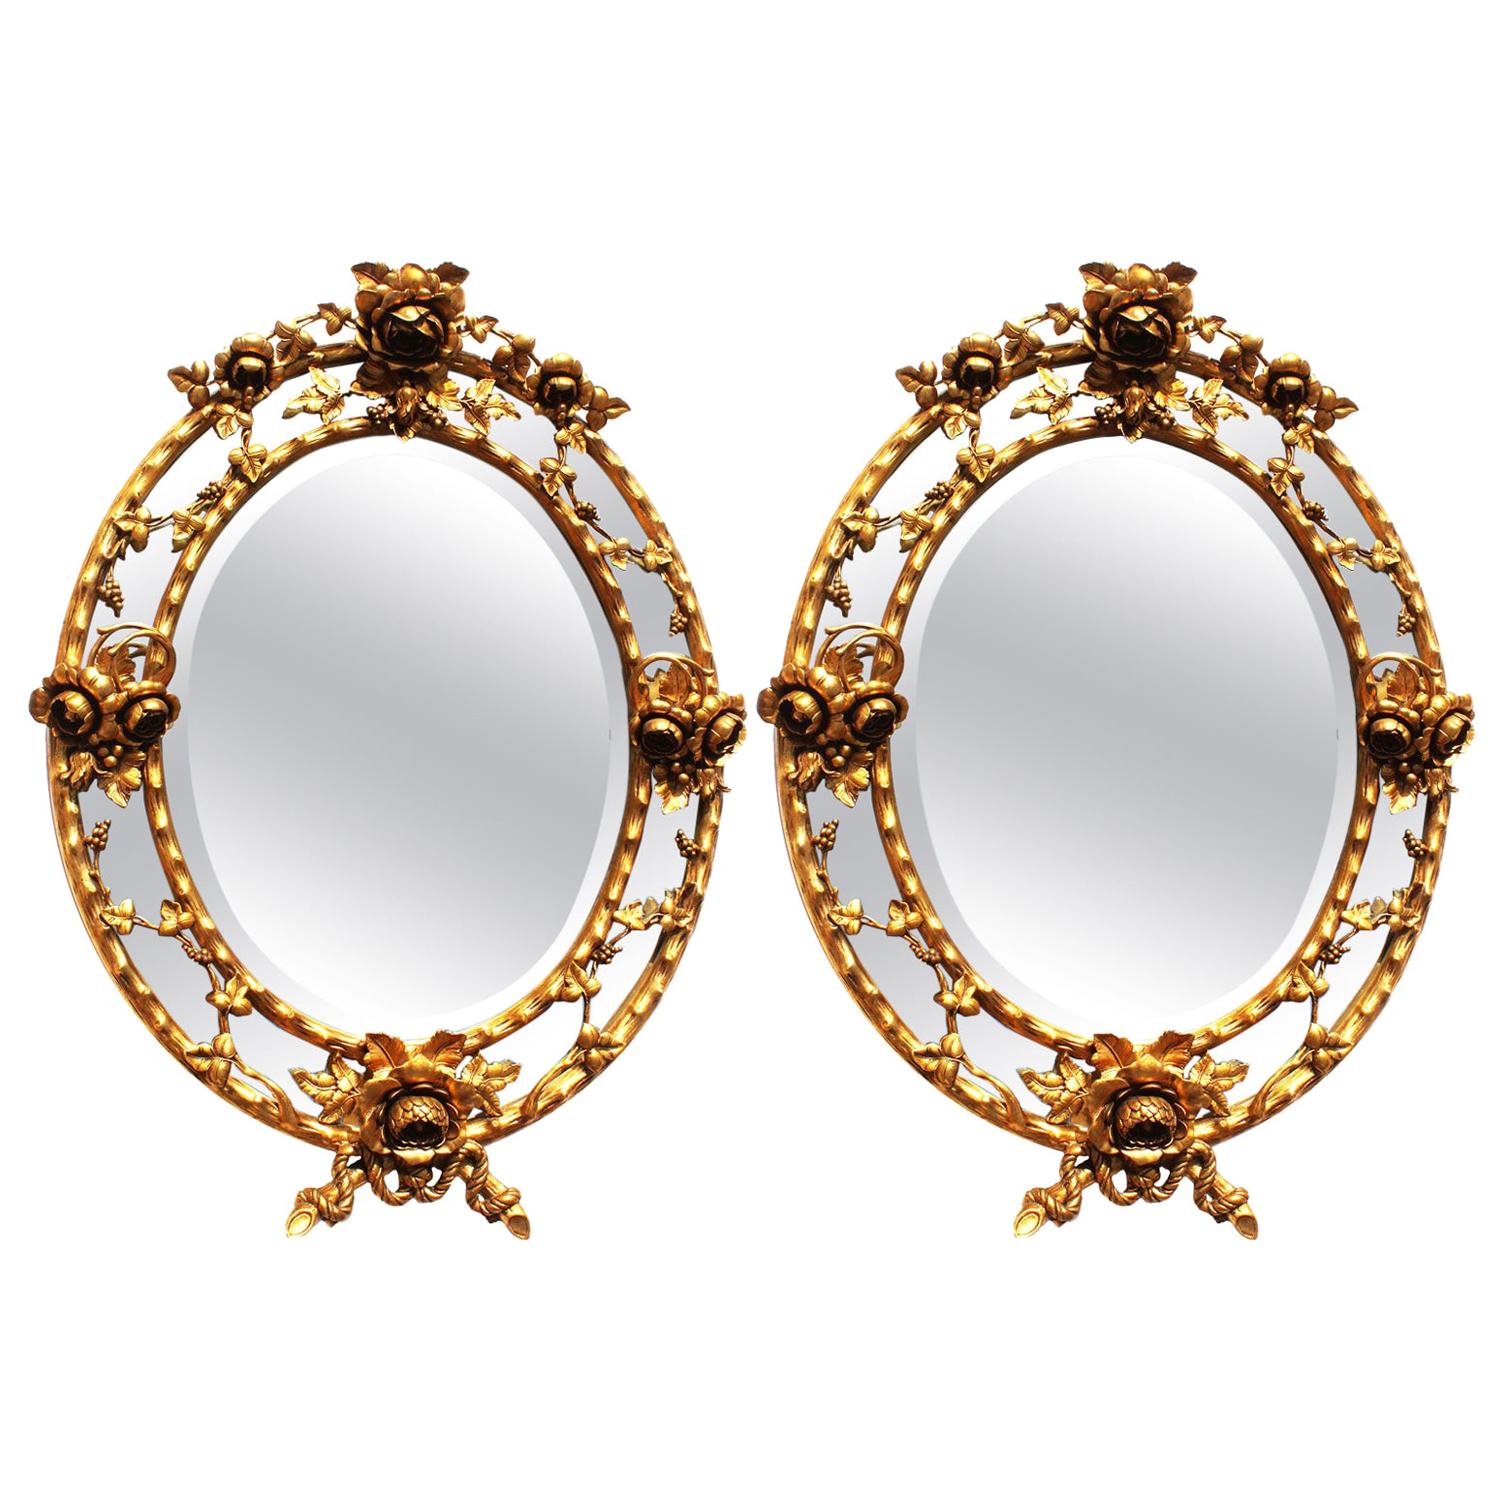 Fine Pair of French Belle Époque Giltwood and Gesso Carved Oval Mirror Frames